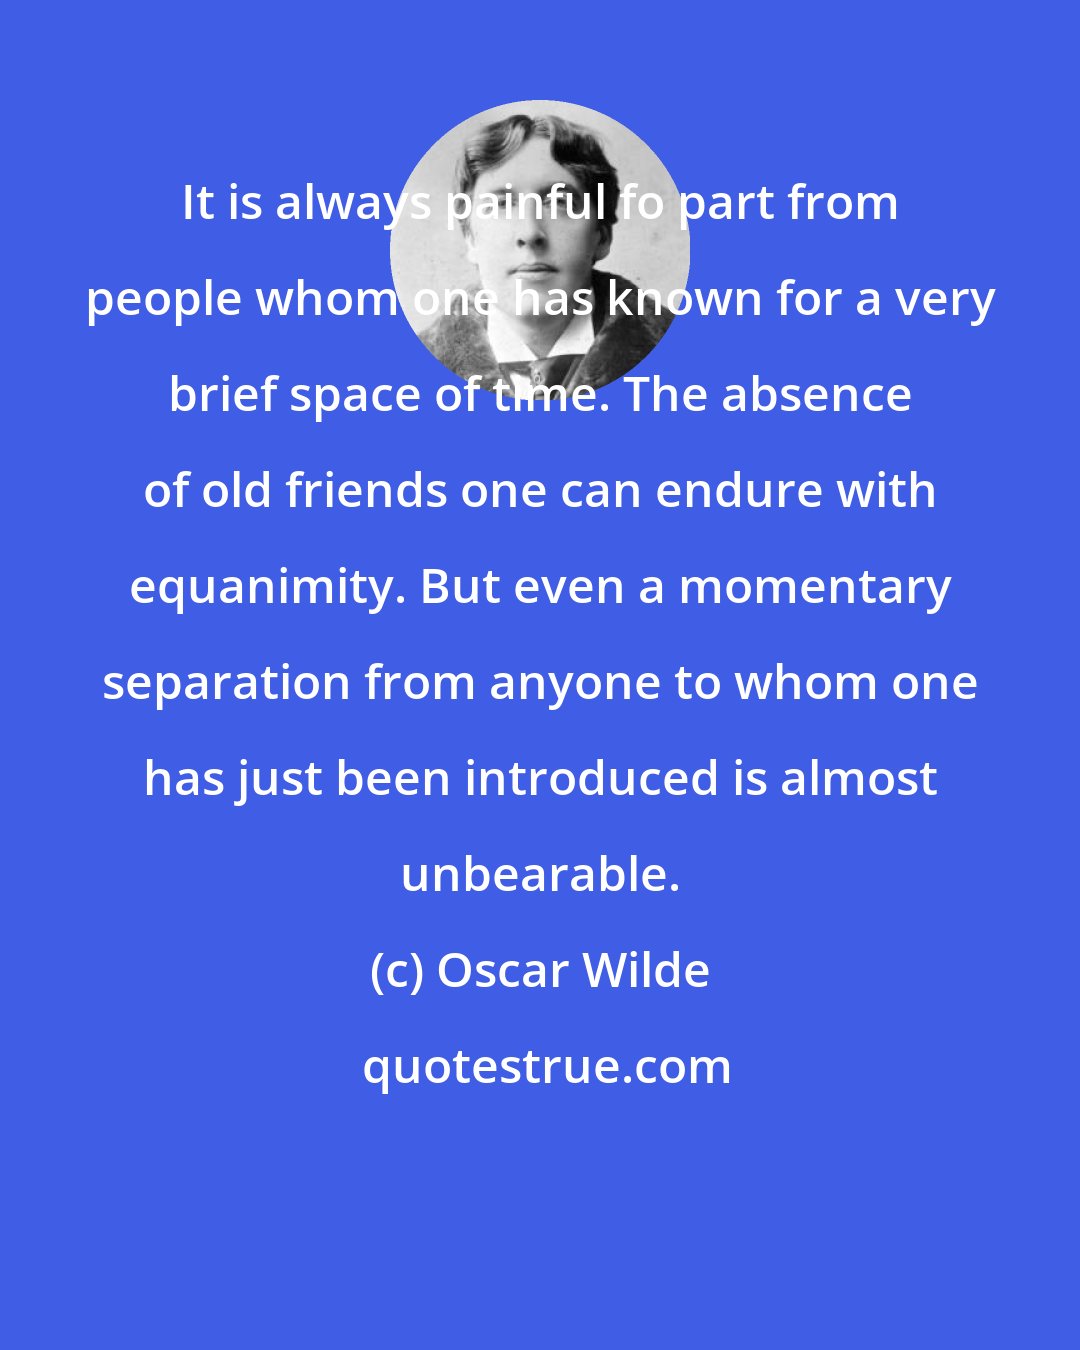 Oscar Wilde: It is always painful fo part from people whom one has known for a very brief space of time. The absence of old friends one can endure with equanimity. But even a momentary separation from anyone to whom one has just been introduced is almost unbearable.